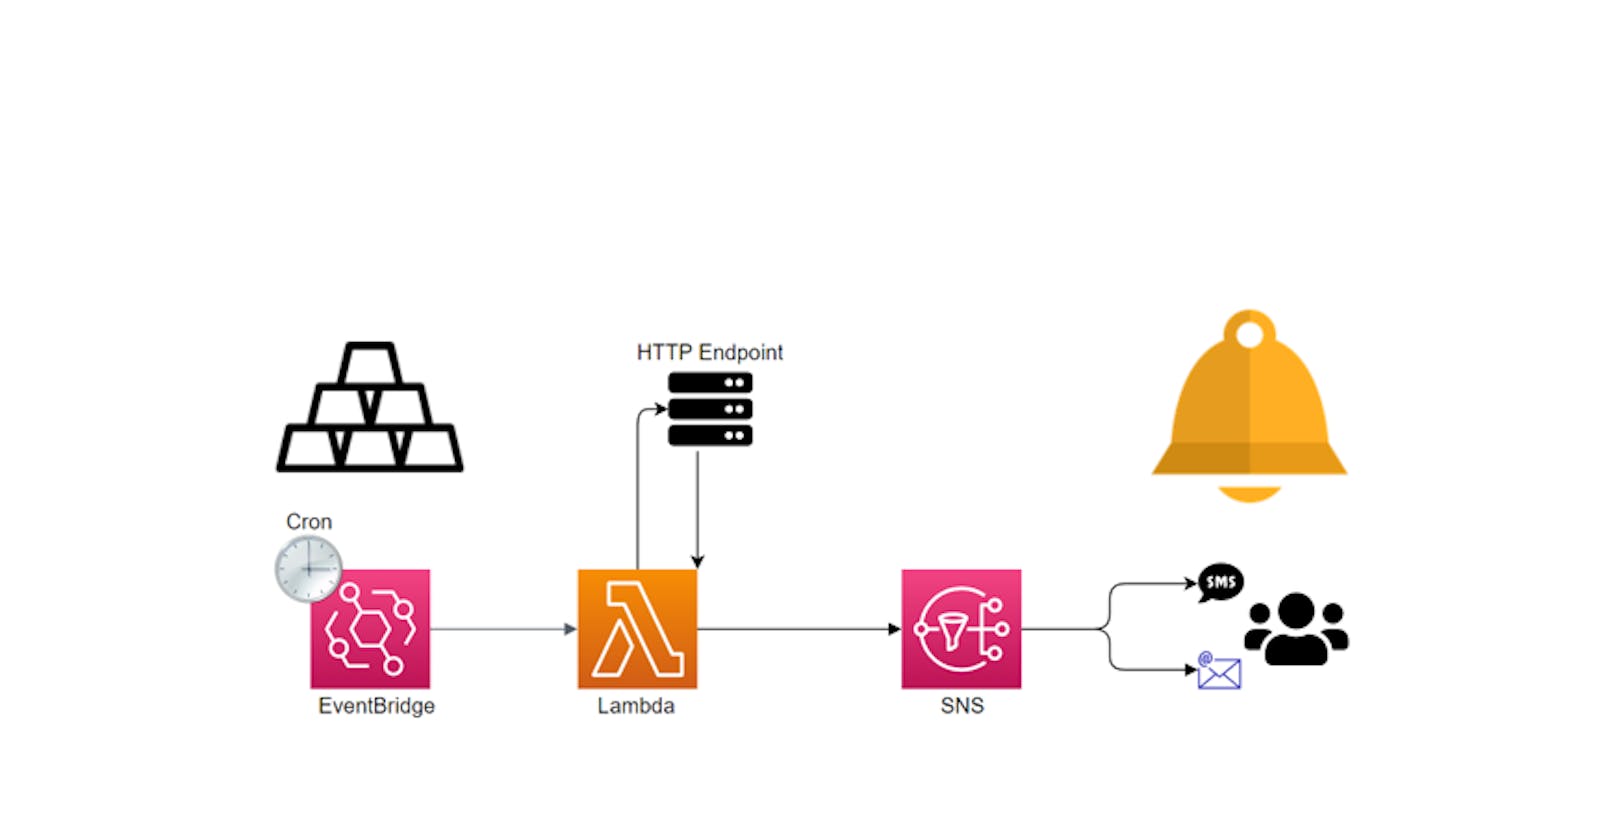 Create a notification system using AWS Lambda, SNS, and Event Bridge